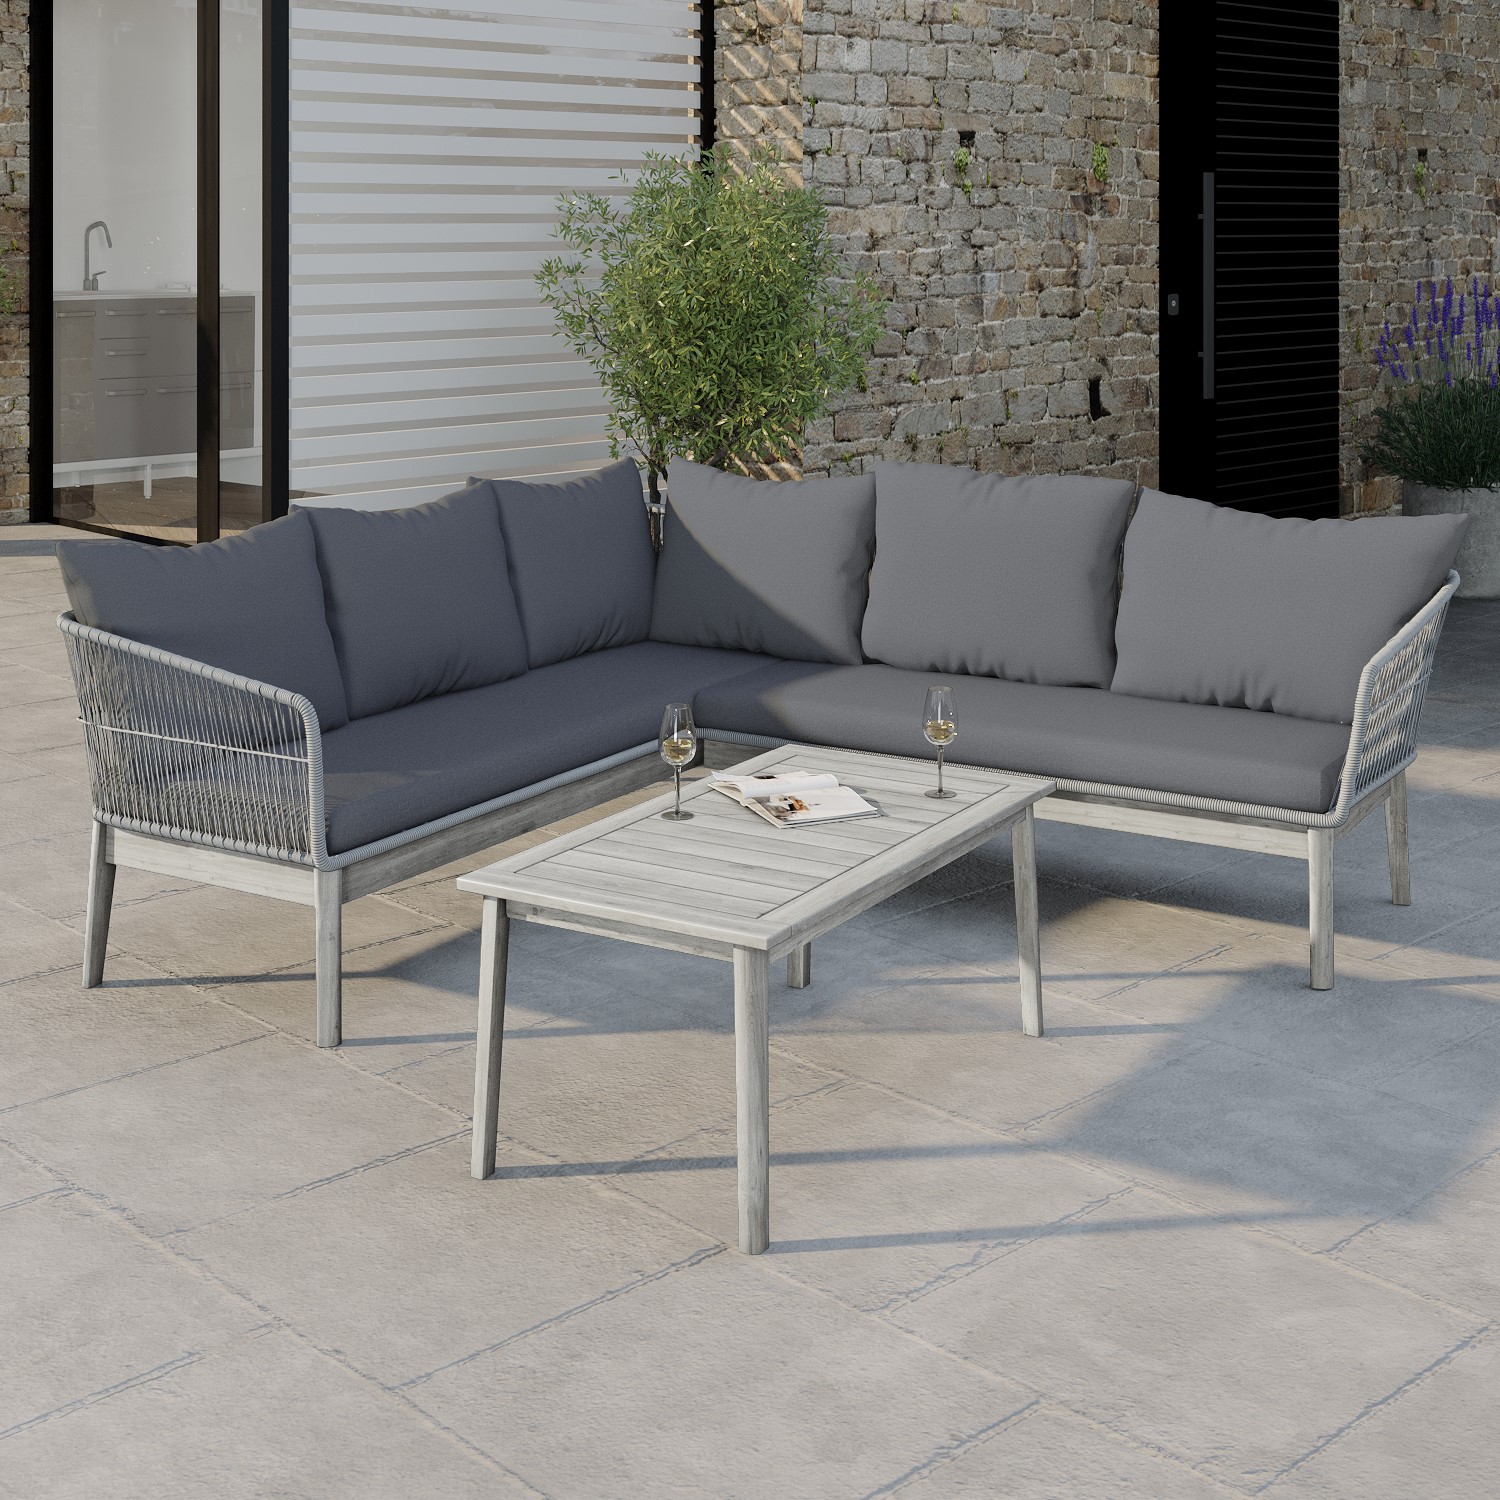 Photo of 5 seater grey rope effect garden corner sofa set with table - como